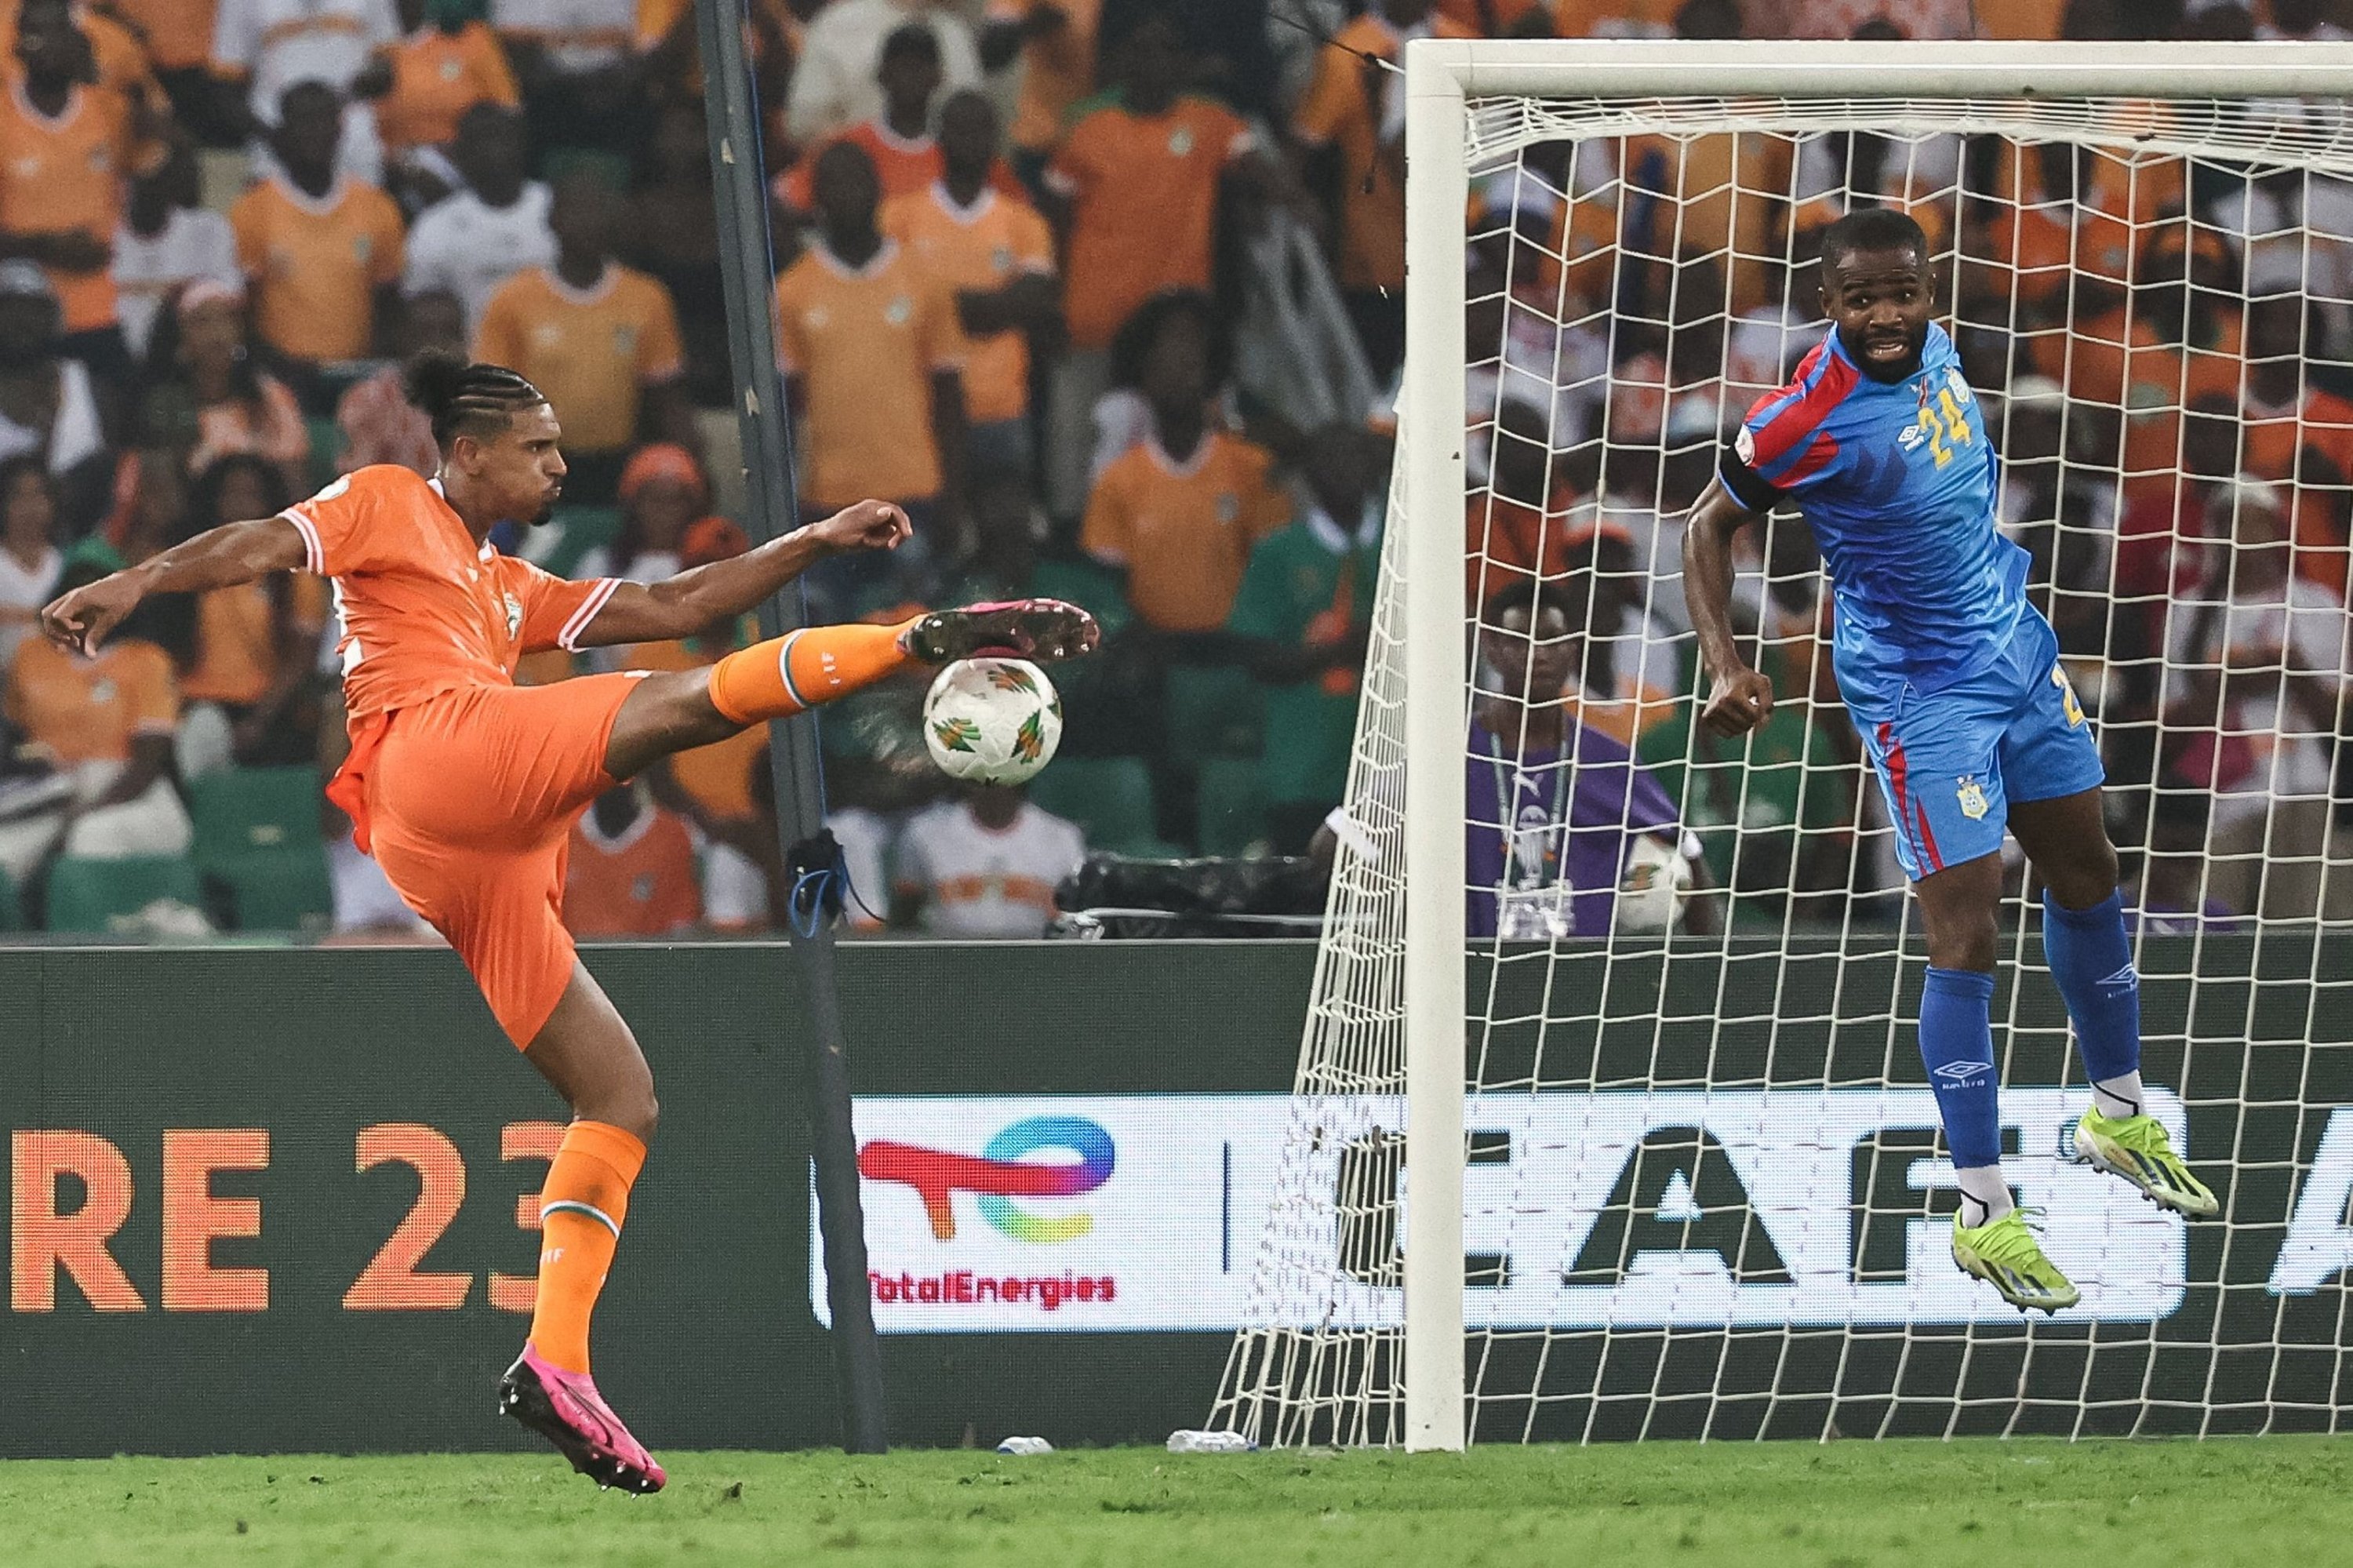 AFCON hosts Ivory Coast edge DRC to secure final spot with Nigeria